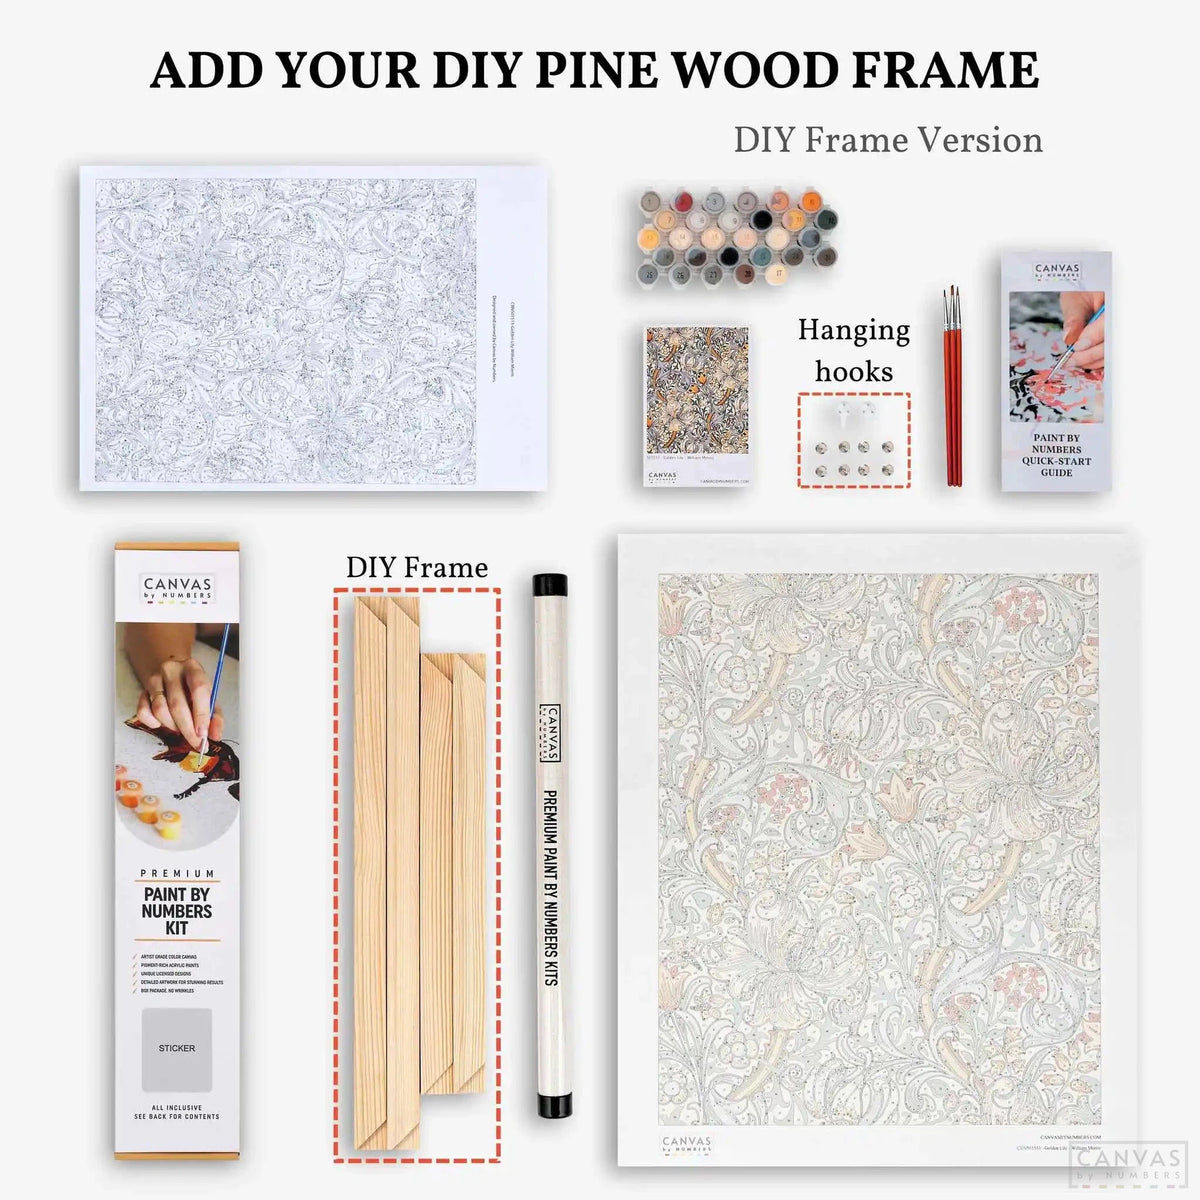 Impression Sunrise - Paint by Numbers-You'll love our Impression Sunrise - Claude Monet paint by numbers kit. Up to 50% Off! Free shipping and 60 days money-back. Shop at Canvas by Numbers.-Canvas by Numbers